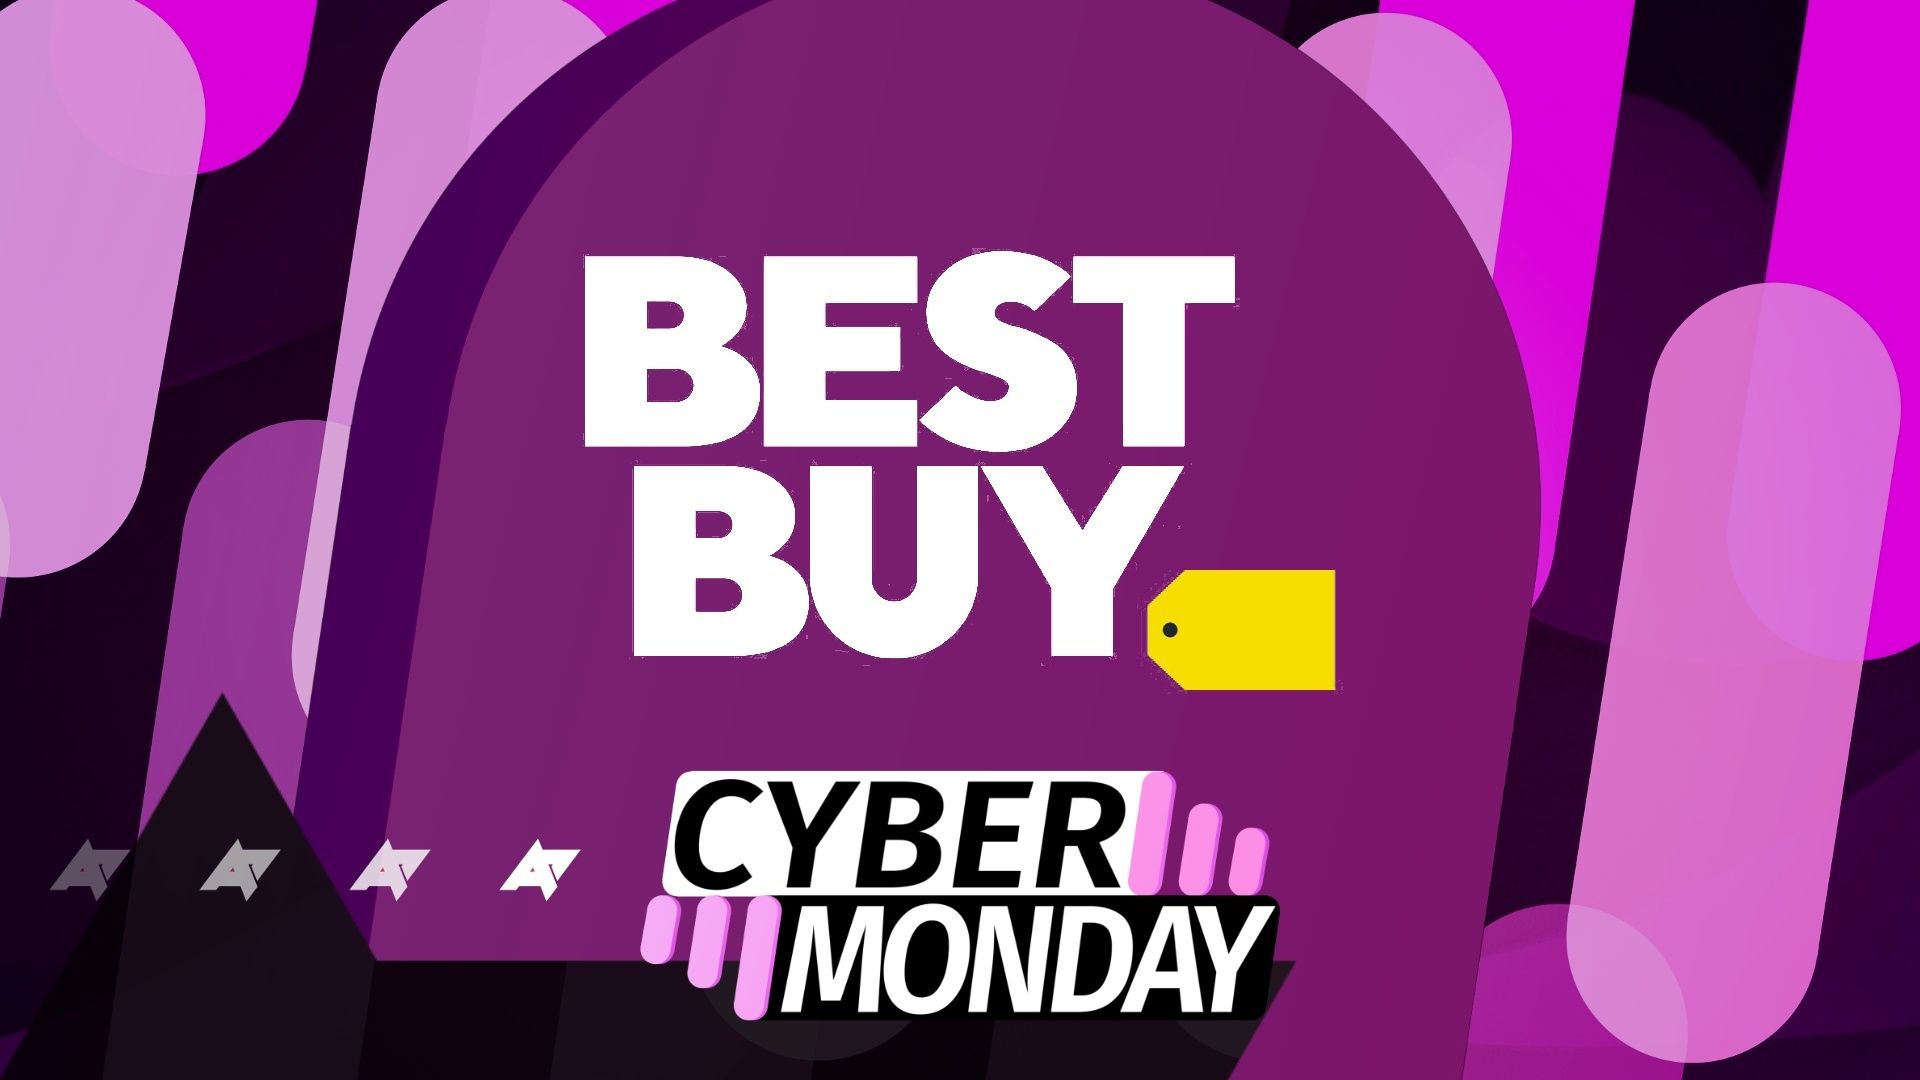 The Best Buy logo on a purple background with a Cyber Monday logo below